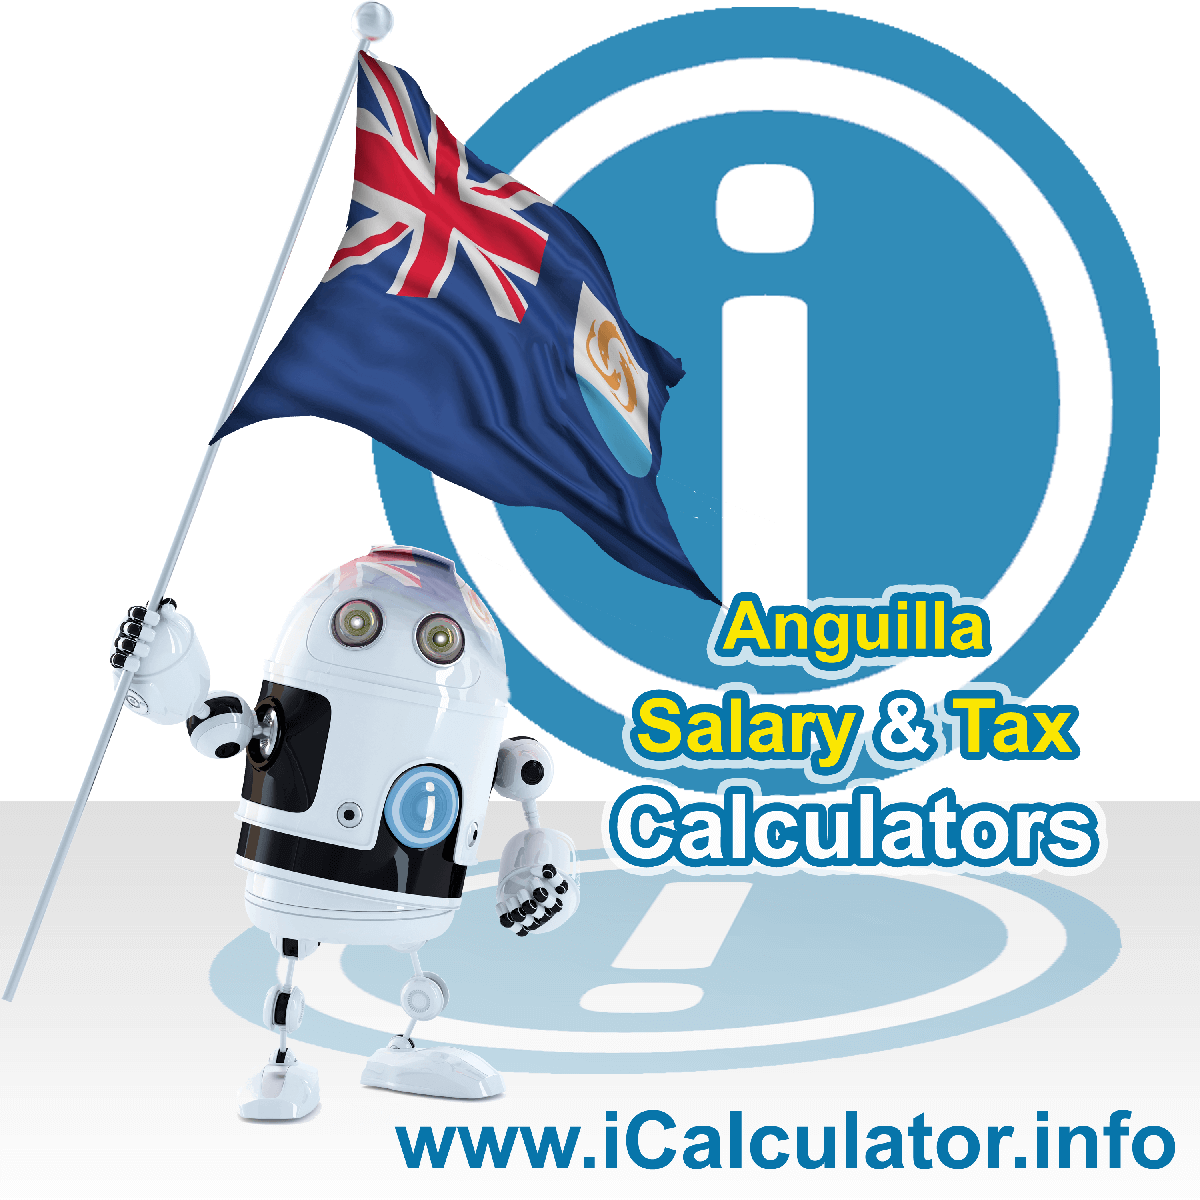 Anguilla Wage Calculator. This image shows the Anguilla flag and information relating to the tax formula for the Anguilla Tax Calculator